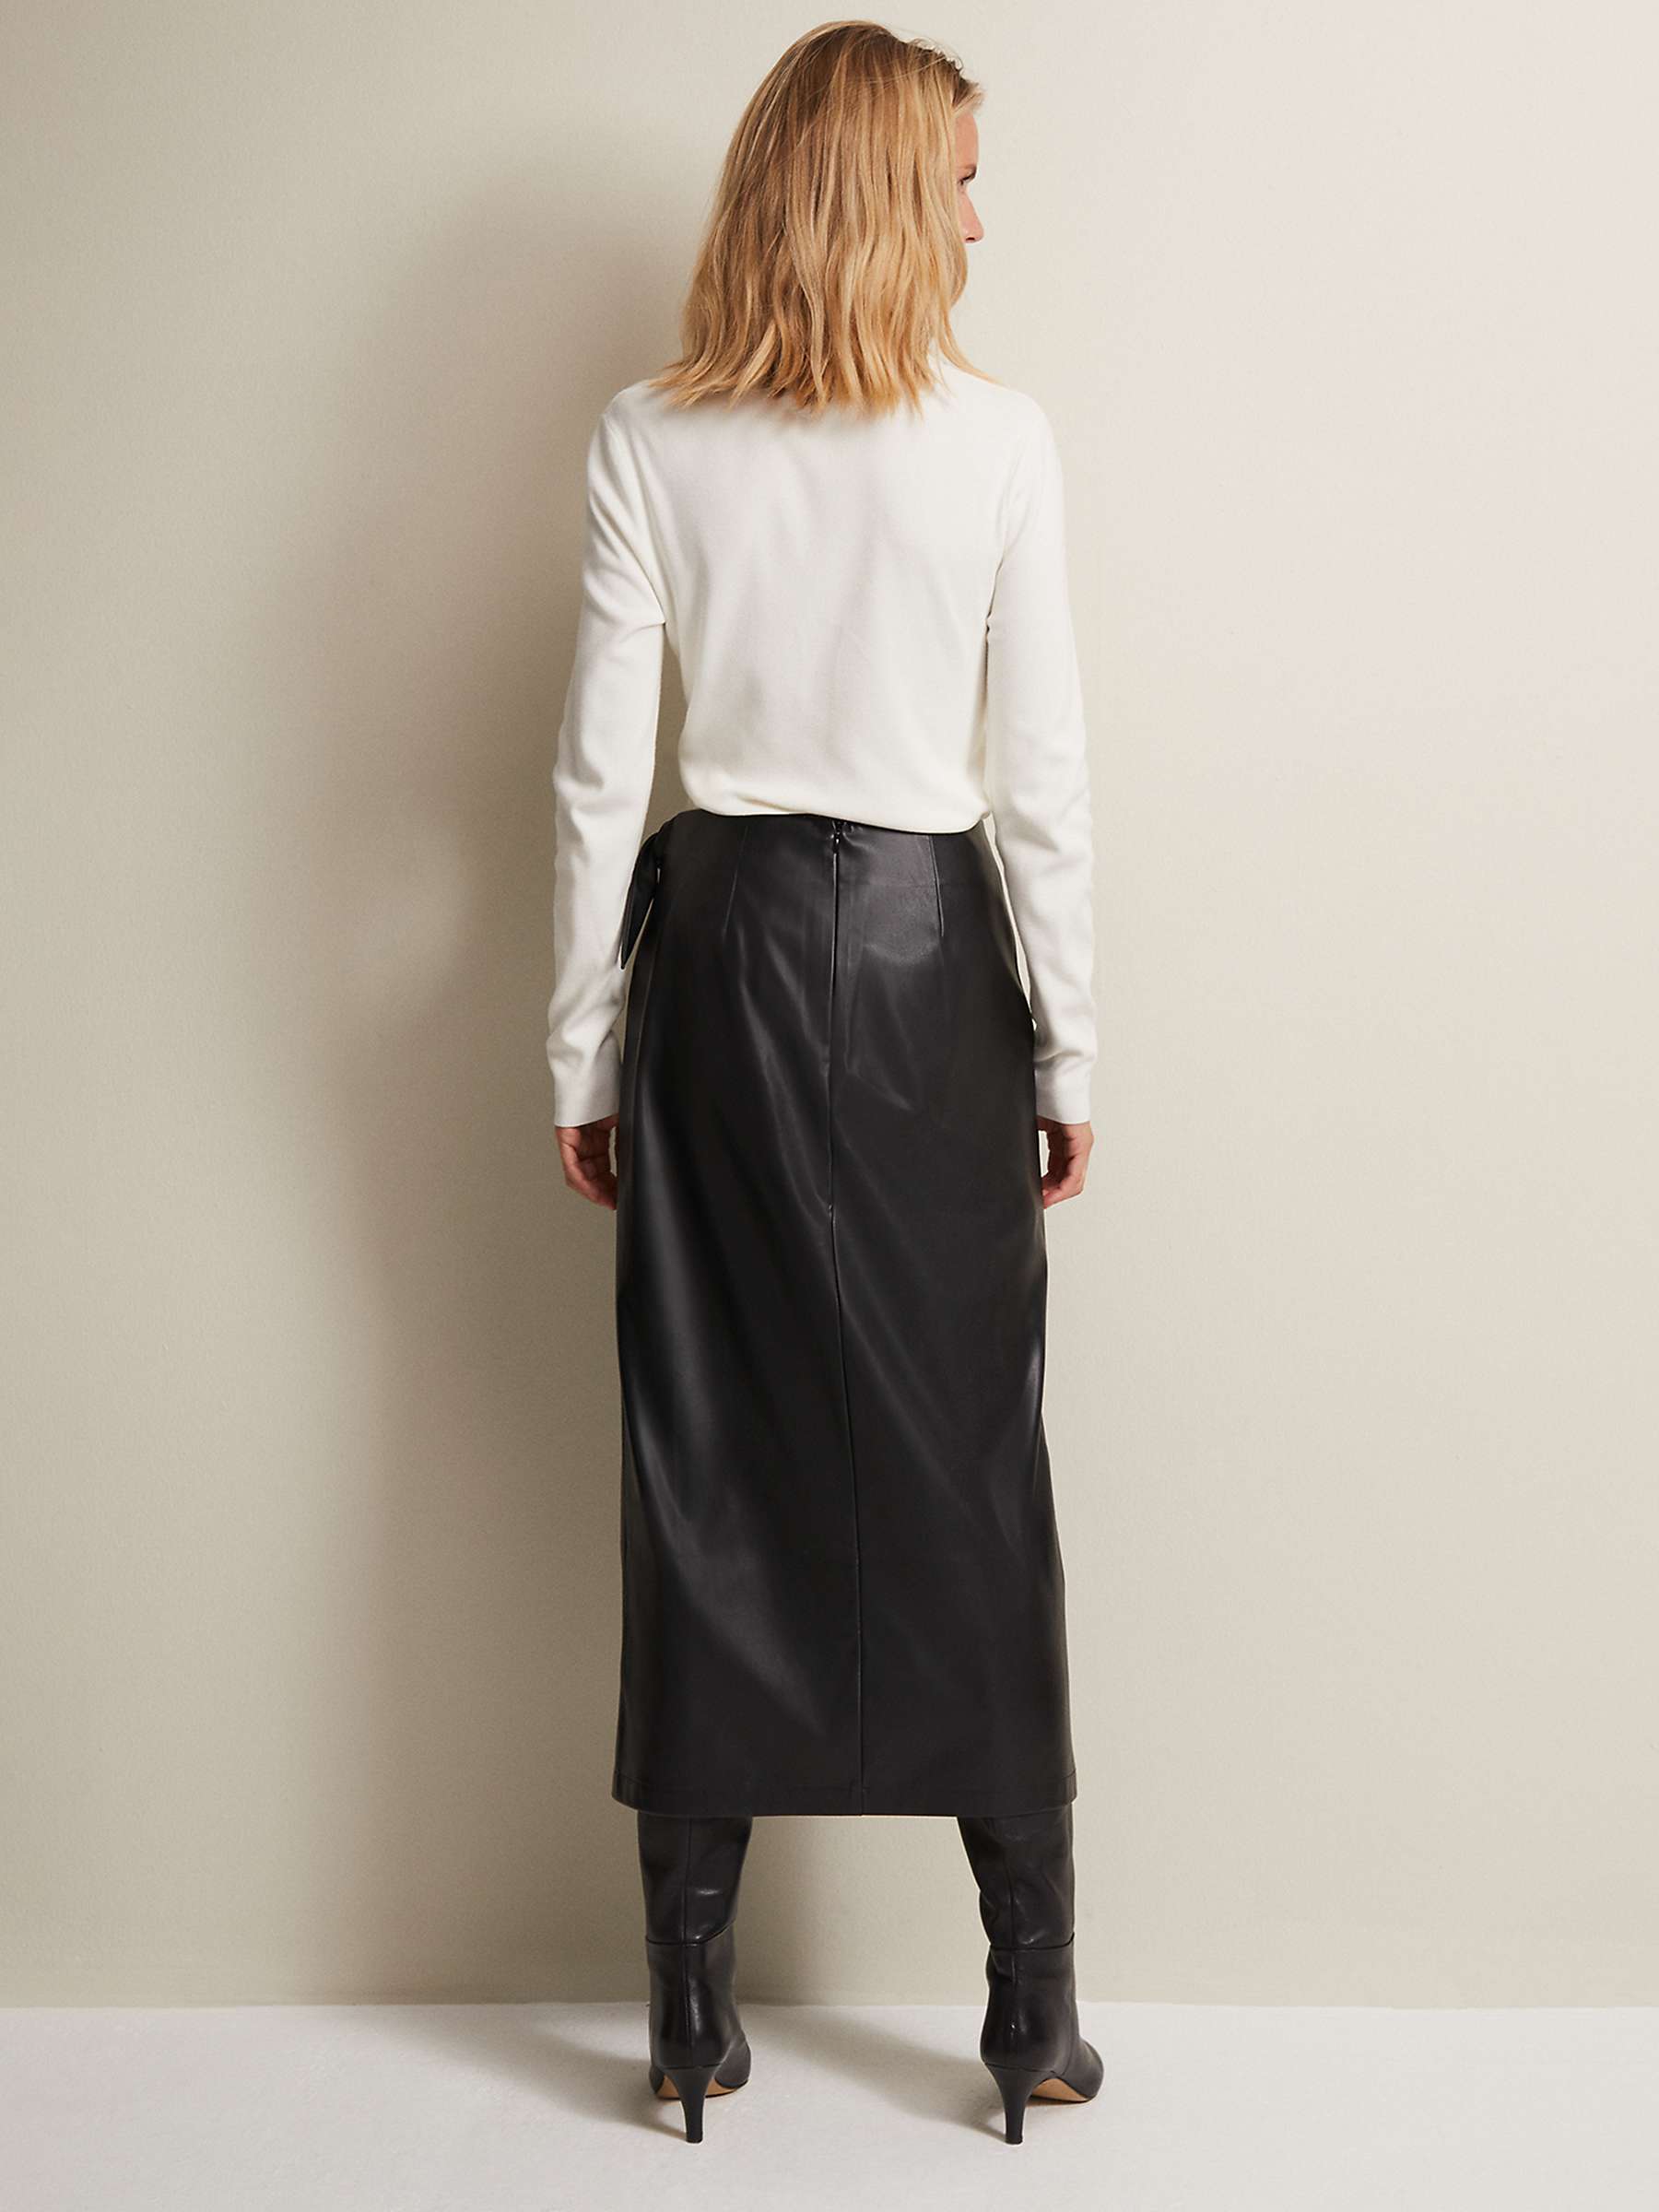 Buy Phase Eight Noha Faux Leather Midi Pencil Skirt, Black Online at johnlewis.com